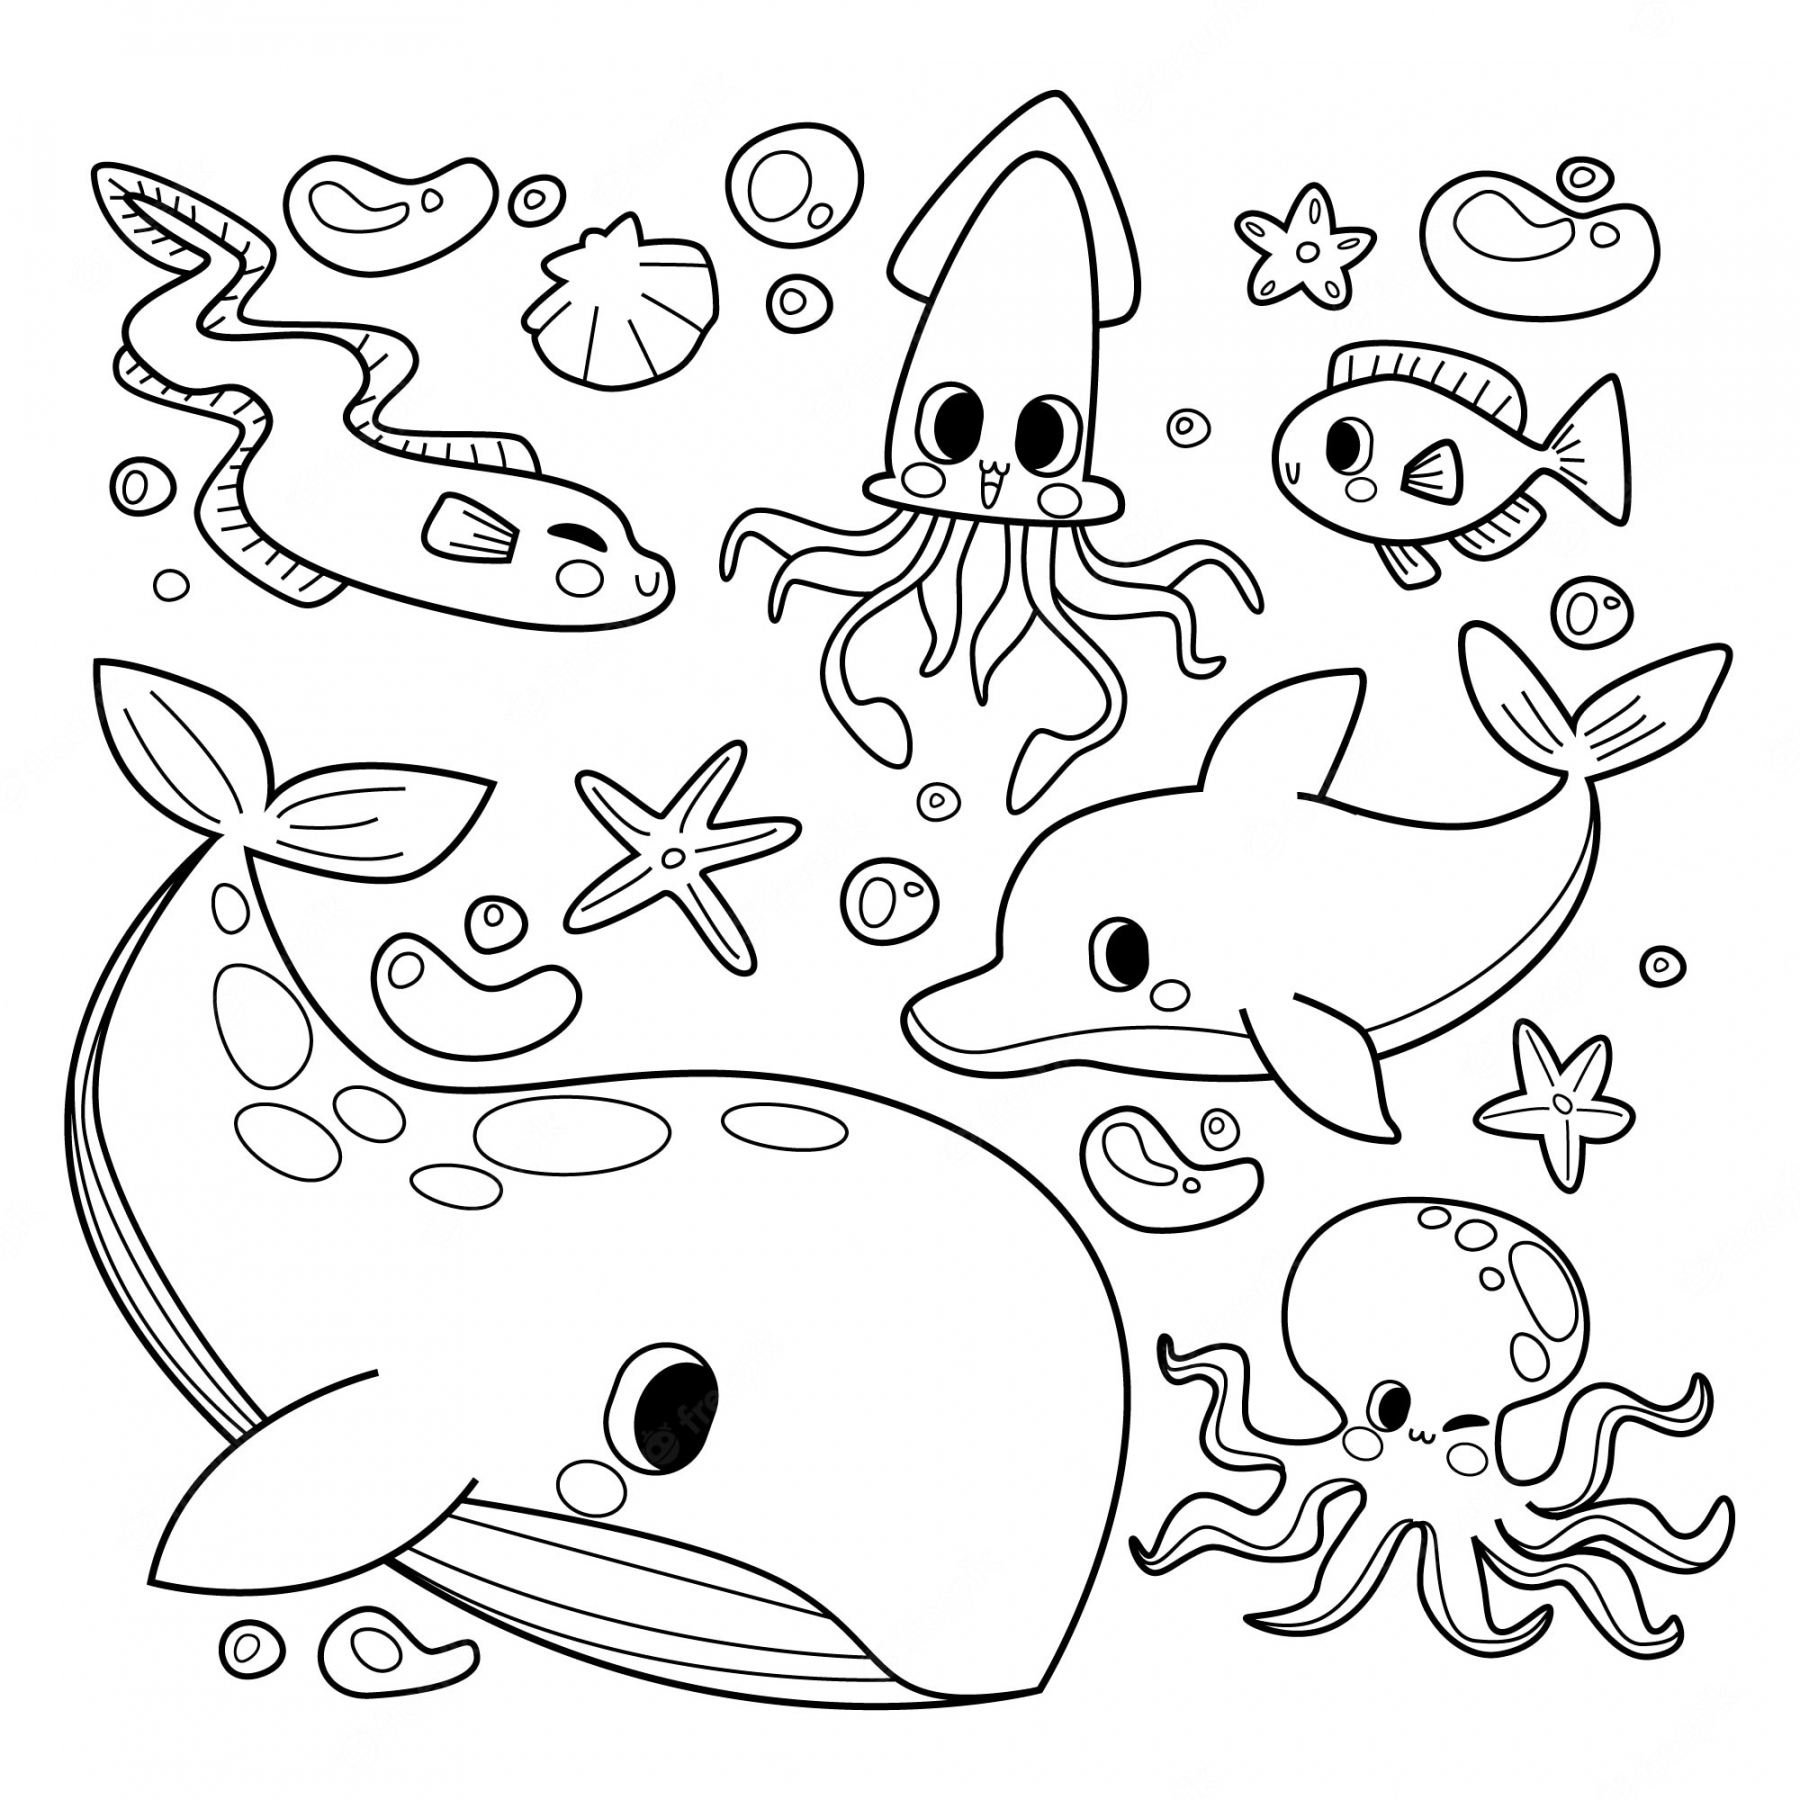 Coloring Pages Free Printables - Printable - Coloring Pages Images - Free Download on Freepik